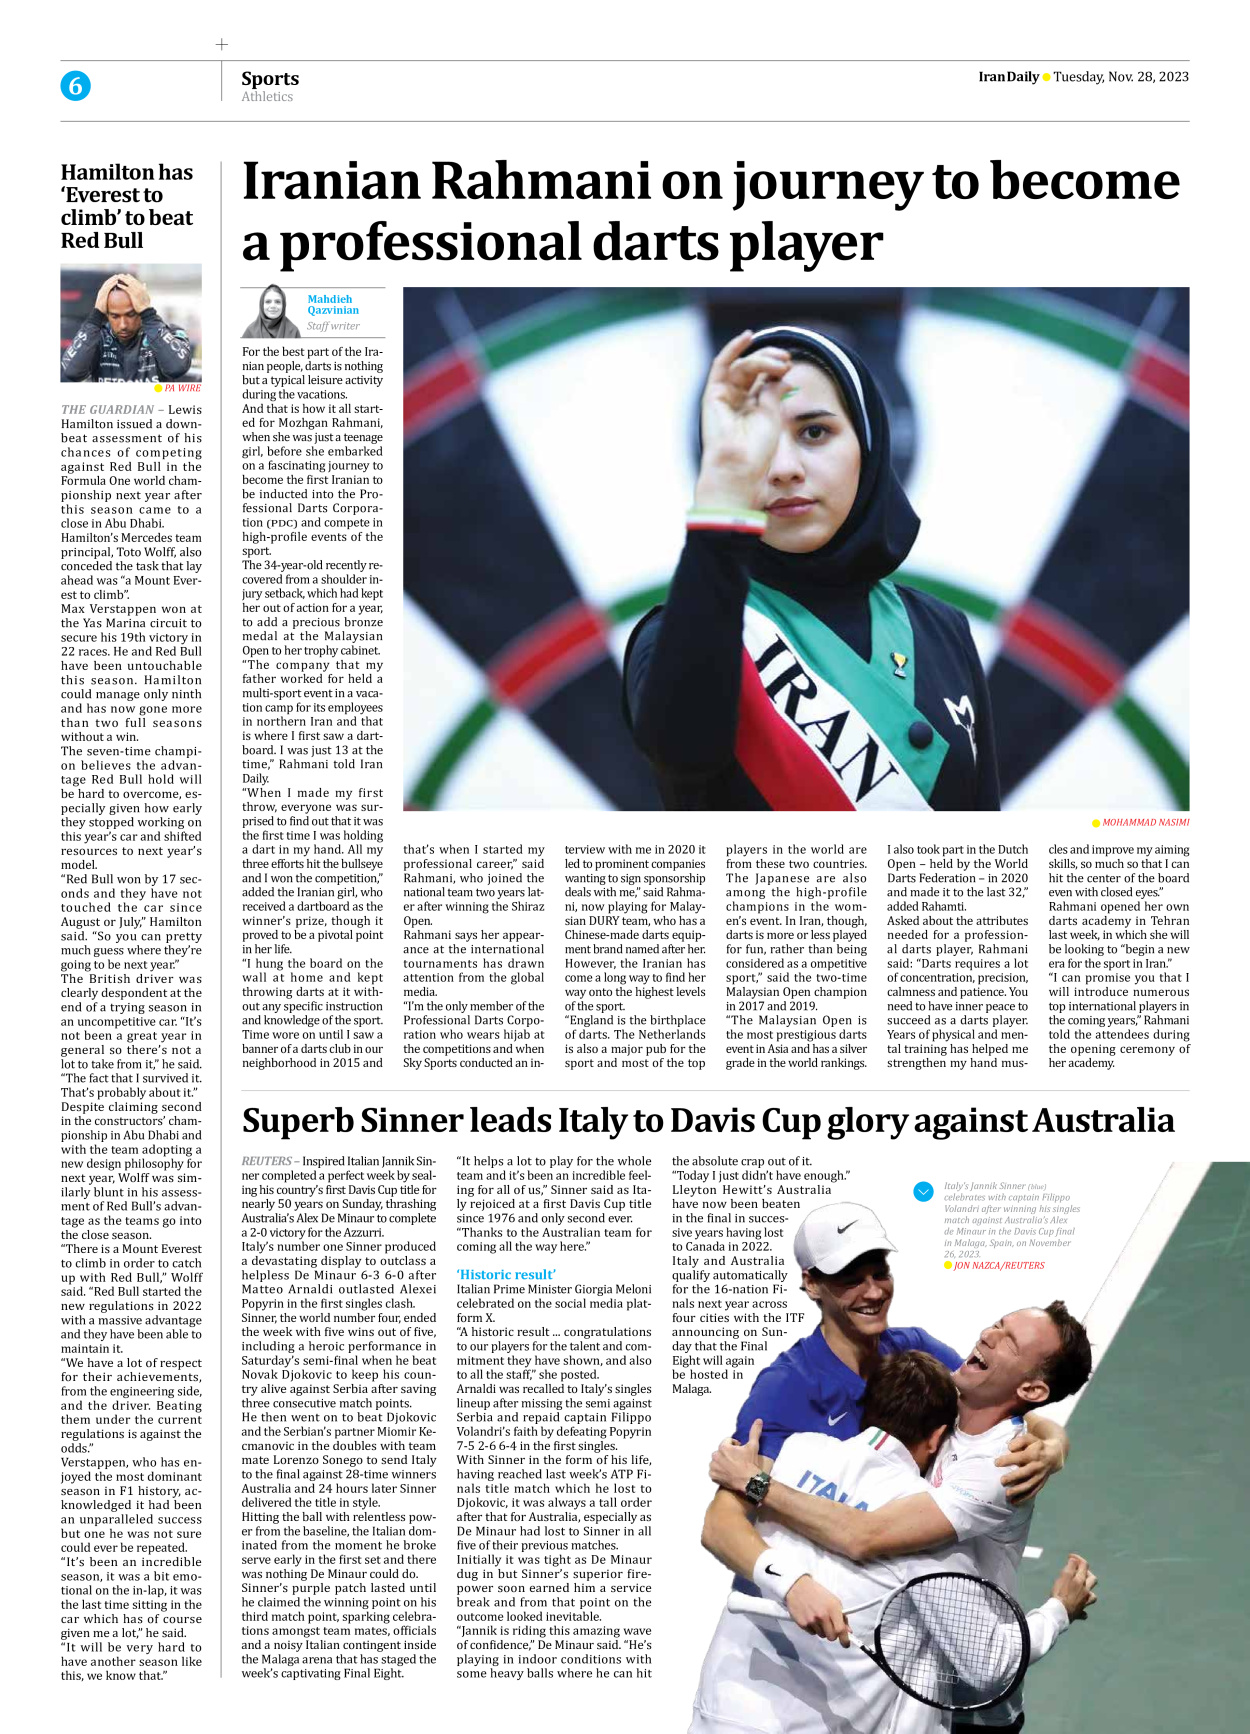 Iran Daily - Number Seven Thousand Four Hundred and Forty Six - 28 November 2023 - Page 6